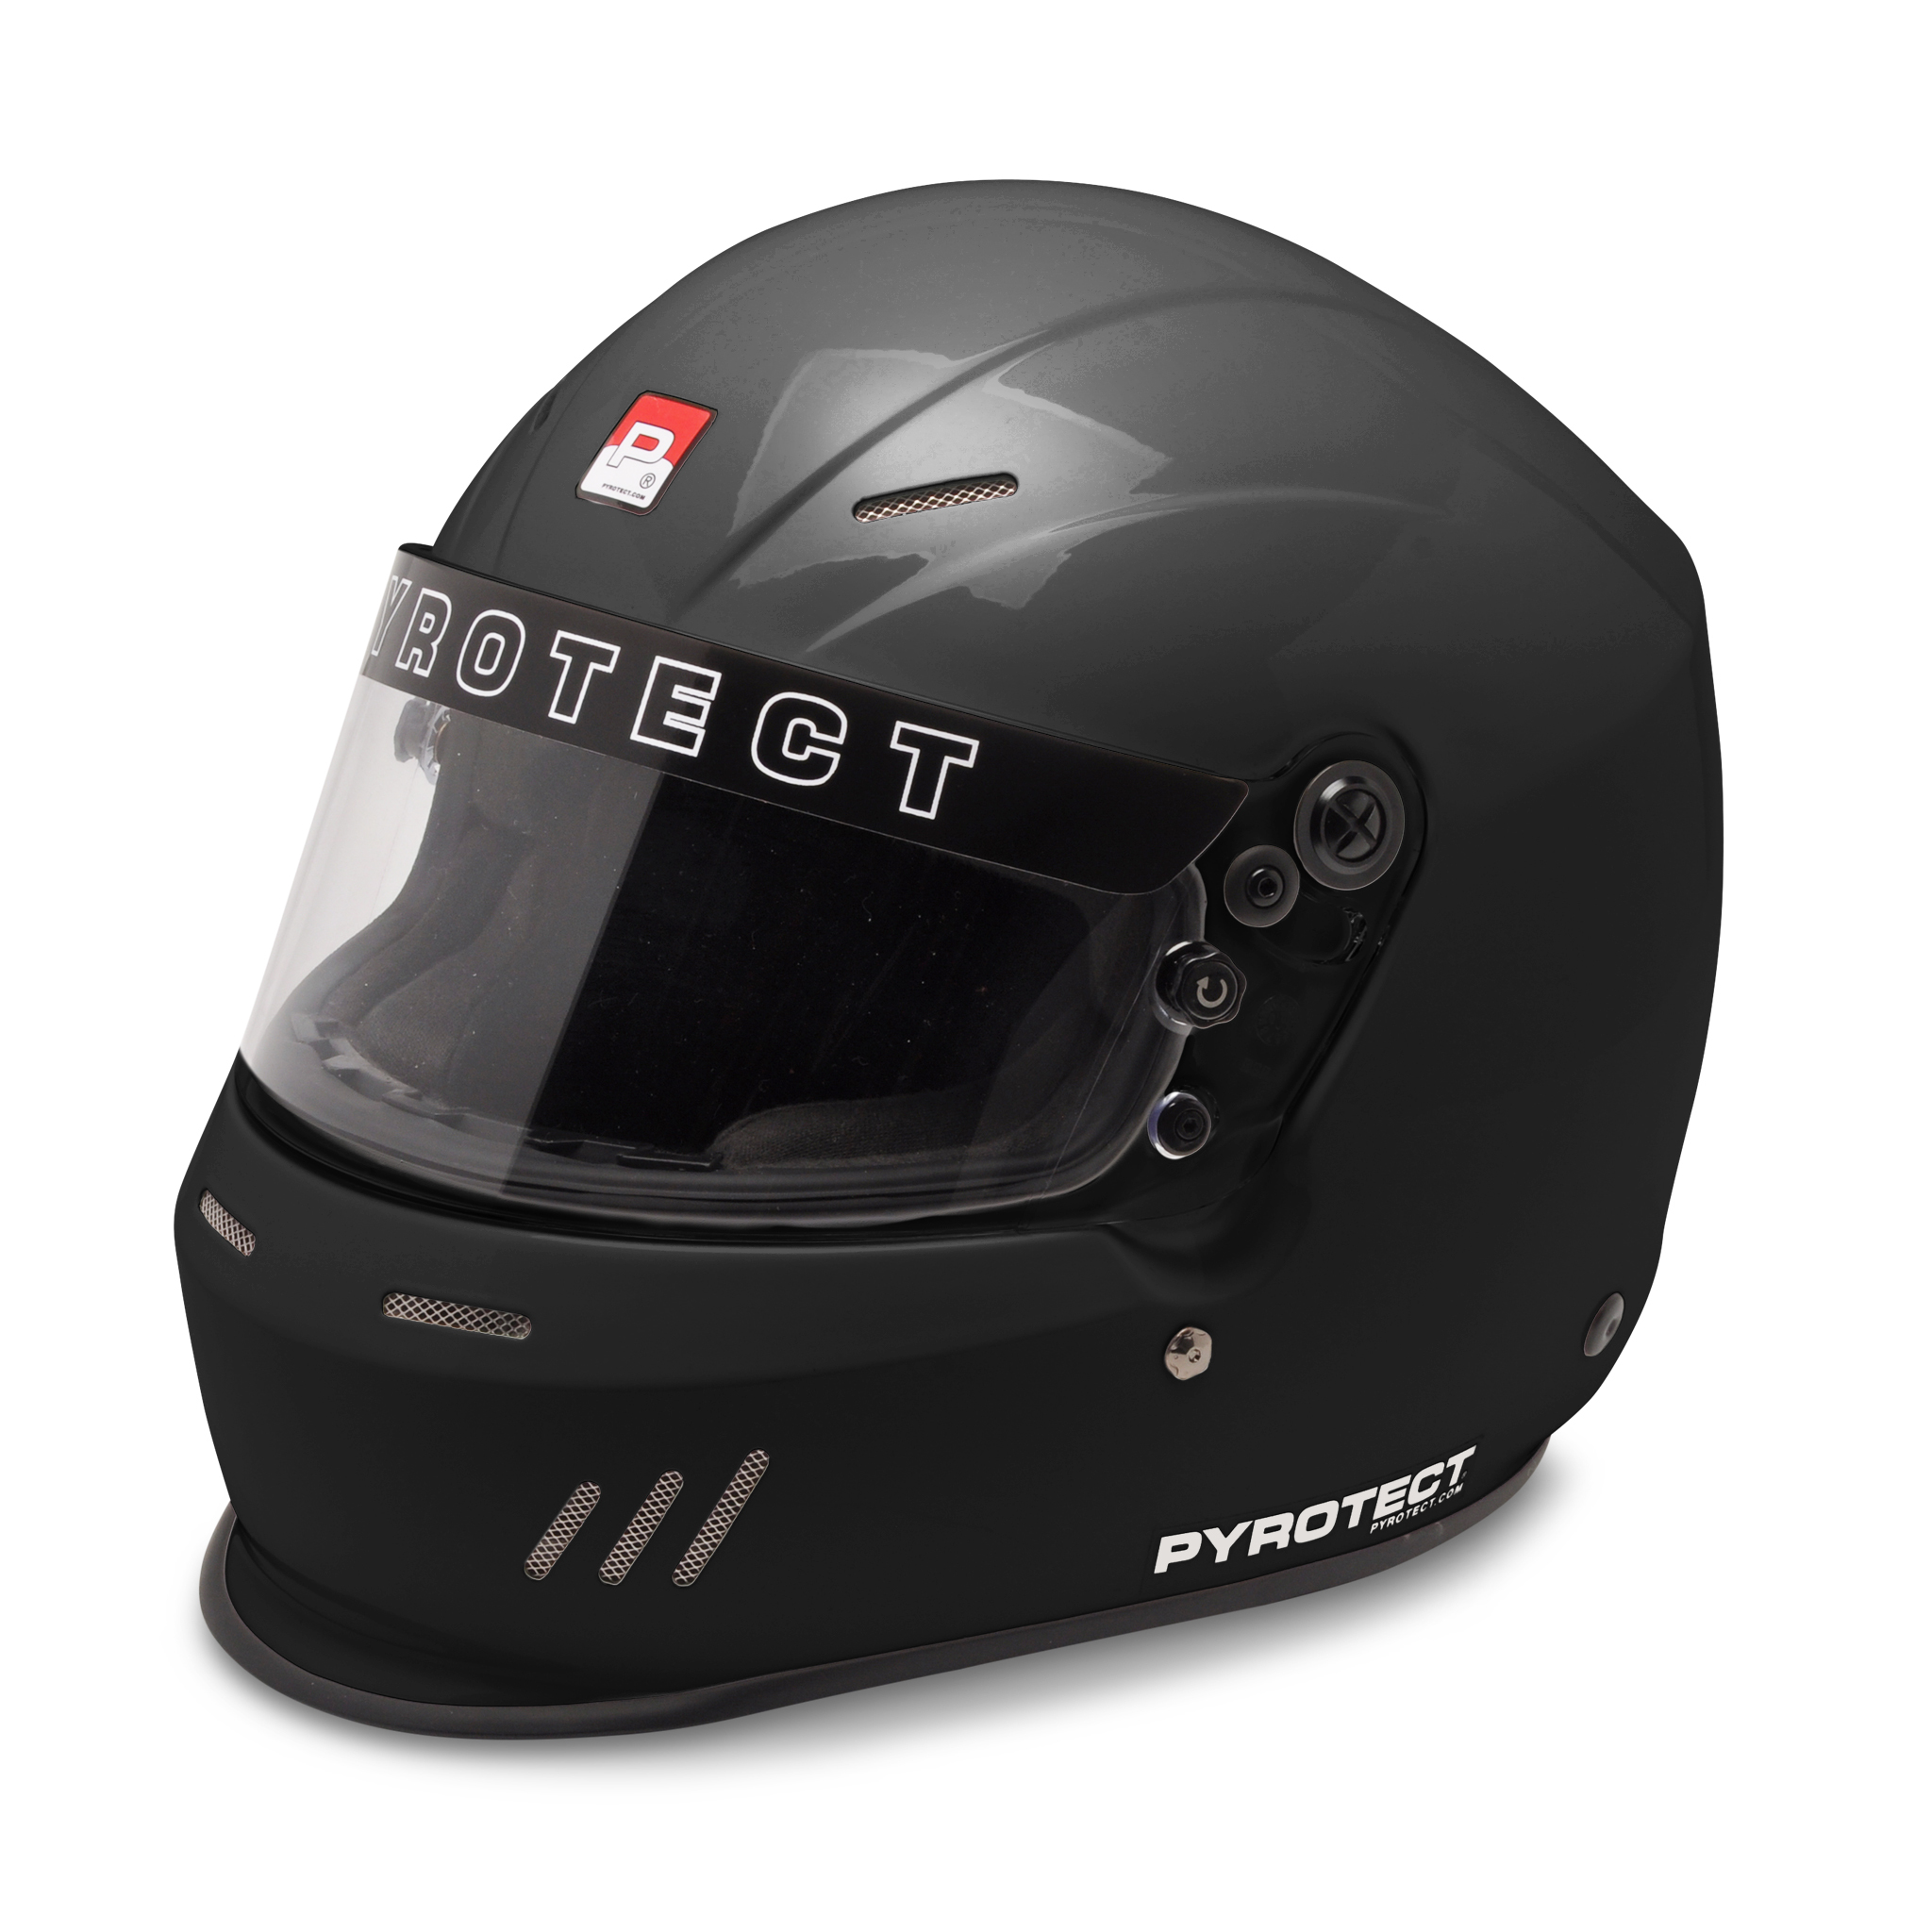 Pyrotect Safety HB611720 Helmet, UltraSport Duckbill, Full Face, Snell SA2020, Head and Neck Support Ready, Gloss Black, 3X-Large, Each